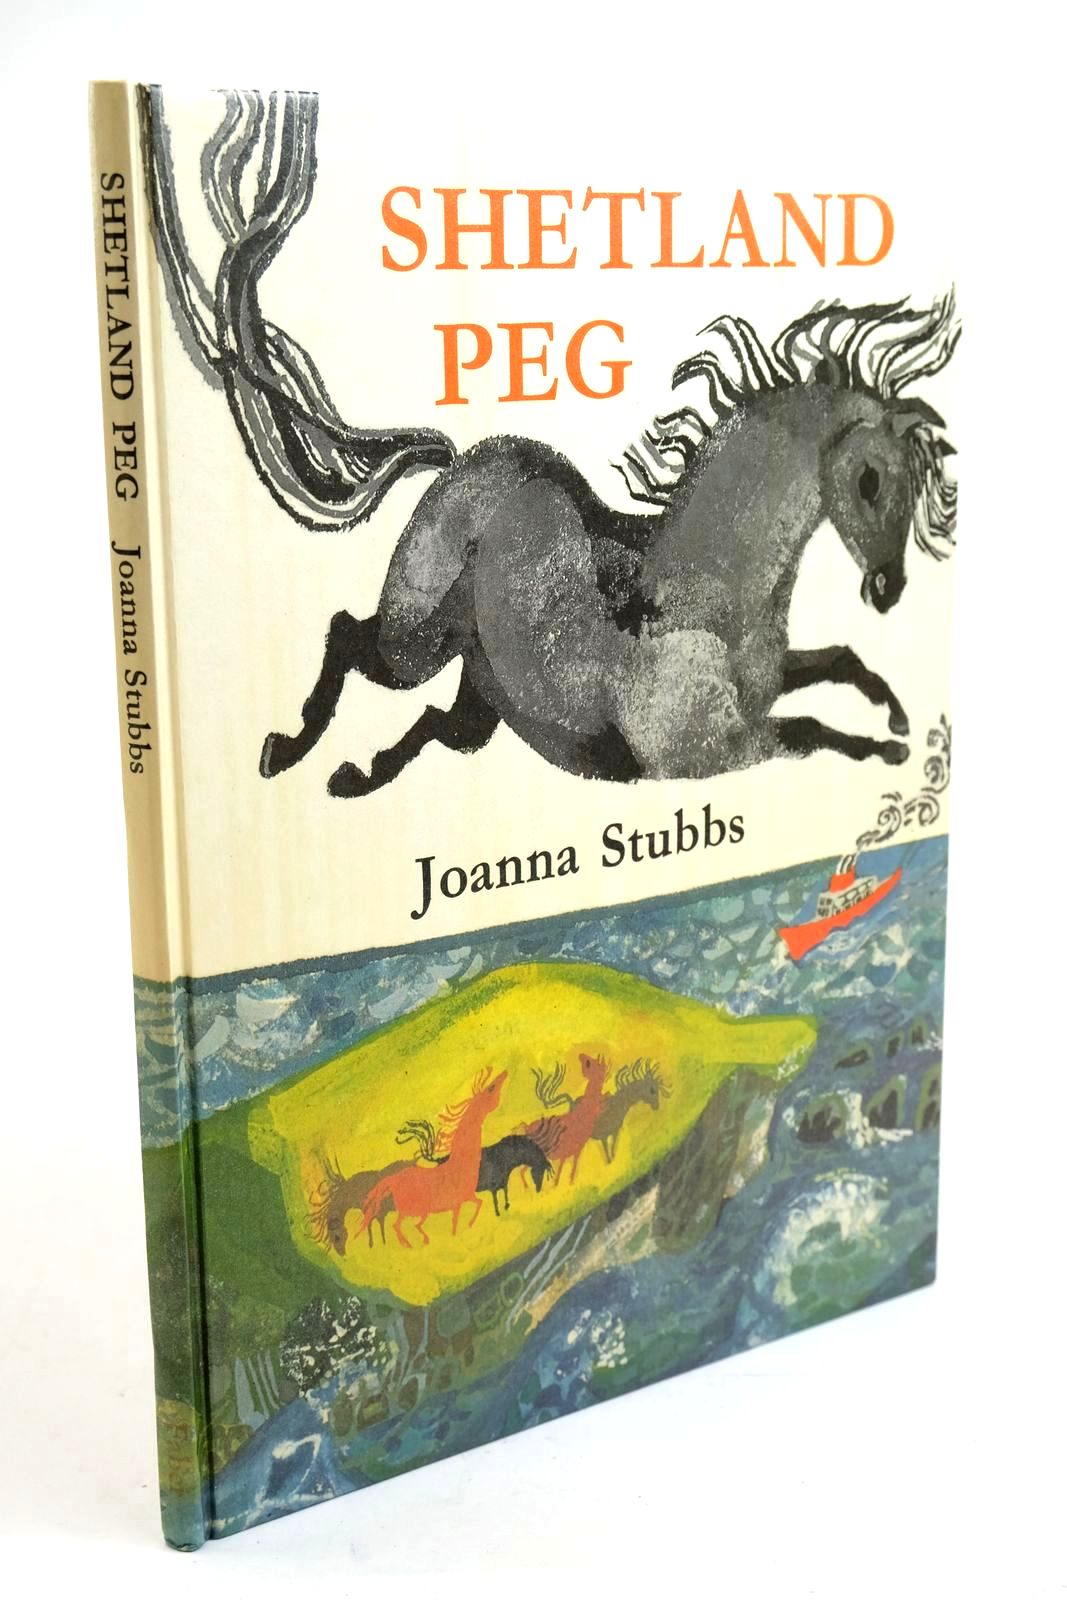 Photo of SHETLAND PEG written by Stubbs, Joanna illustrated by Stubbs, Joanna published by Faber & Faber Limited (STOCK CODE: 1321613)  for sale by Stella & Rose's Books